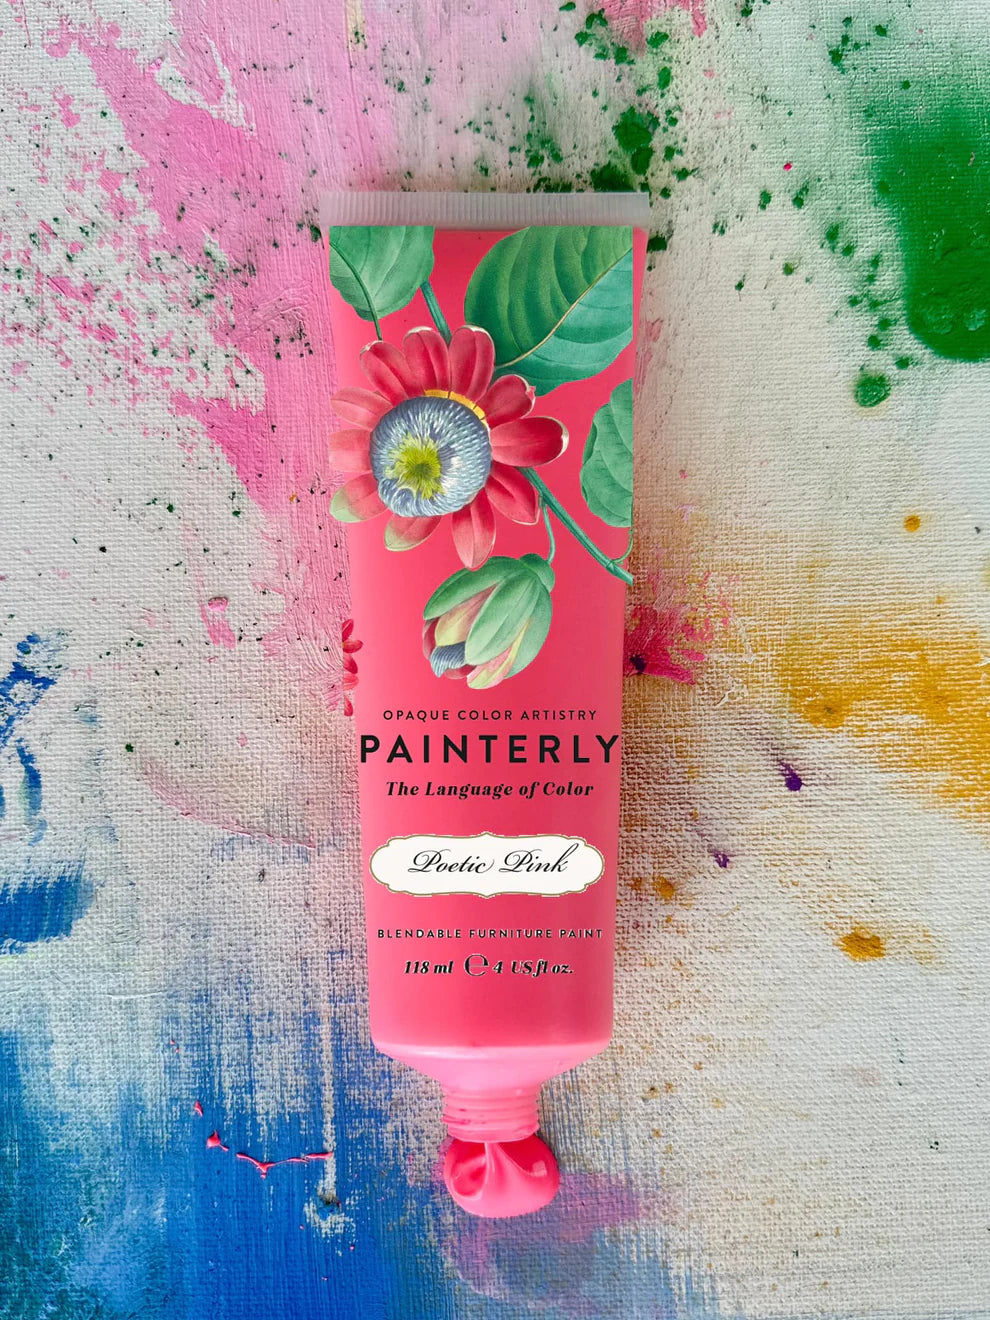 Poetic Pink - Painterly Collection Blendable Furniture Paint by DIY Paint